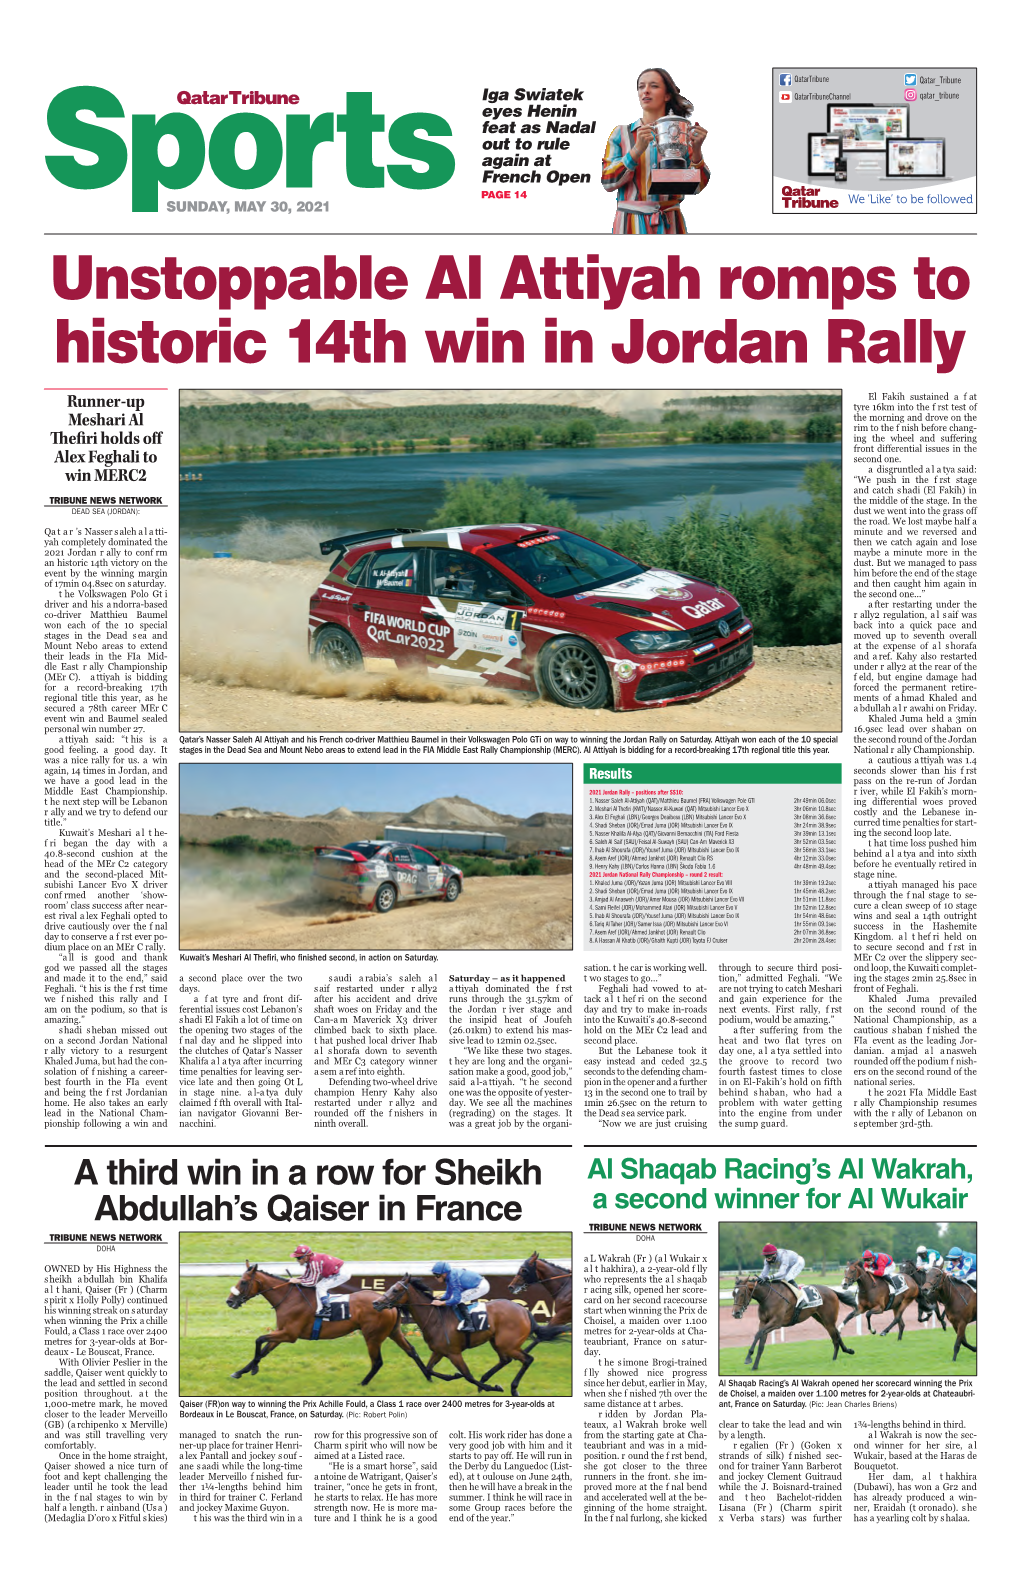 Unstoppable Al Attiyah Romps to Historic 14Th Win in Jordan Rally